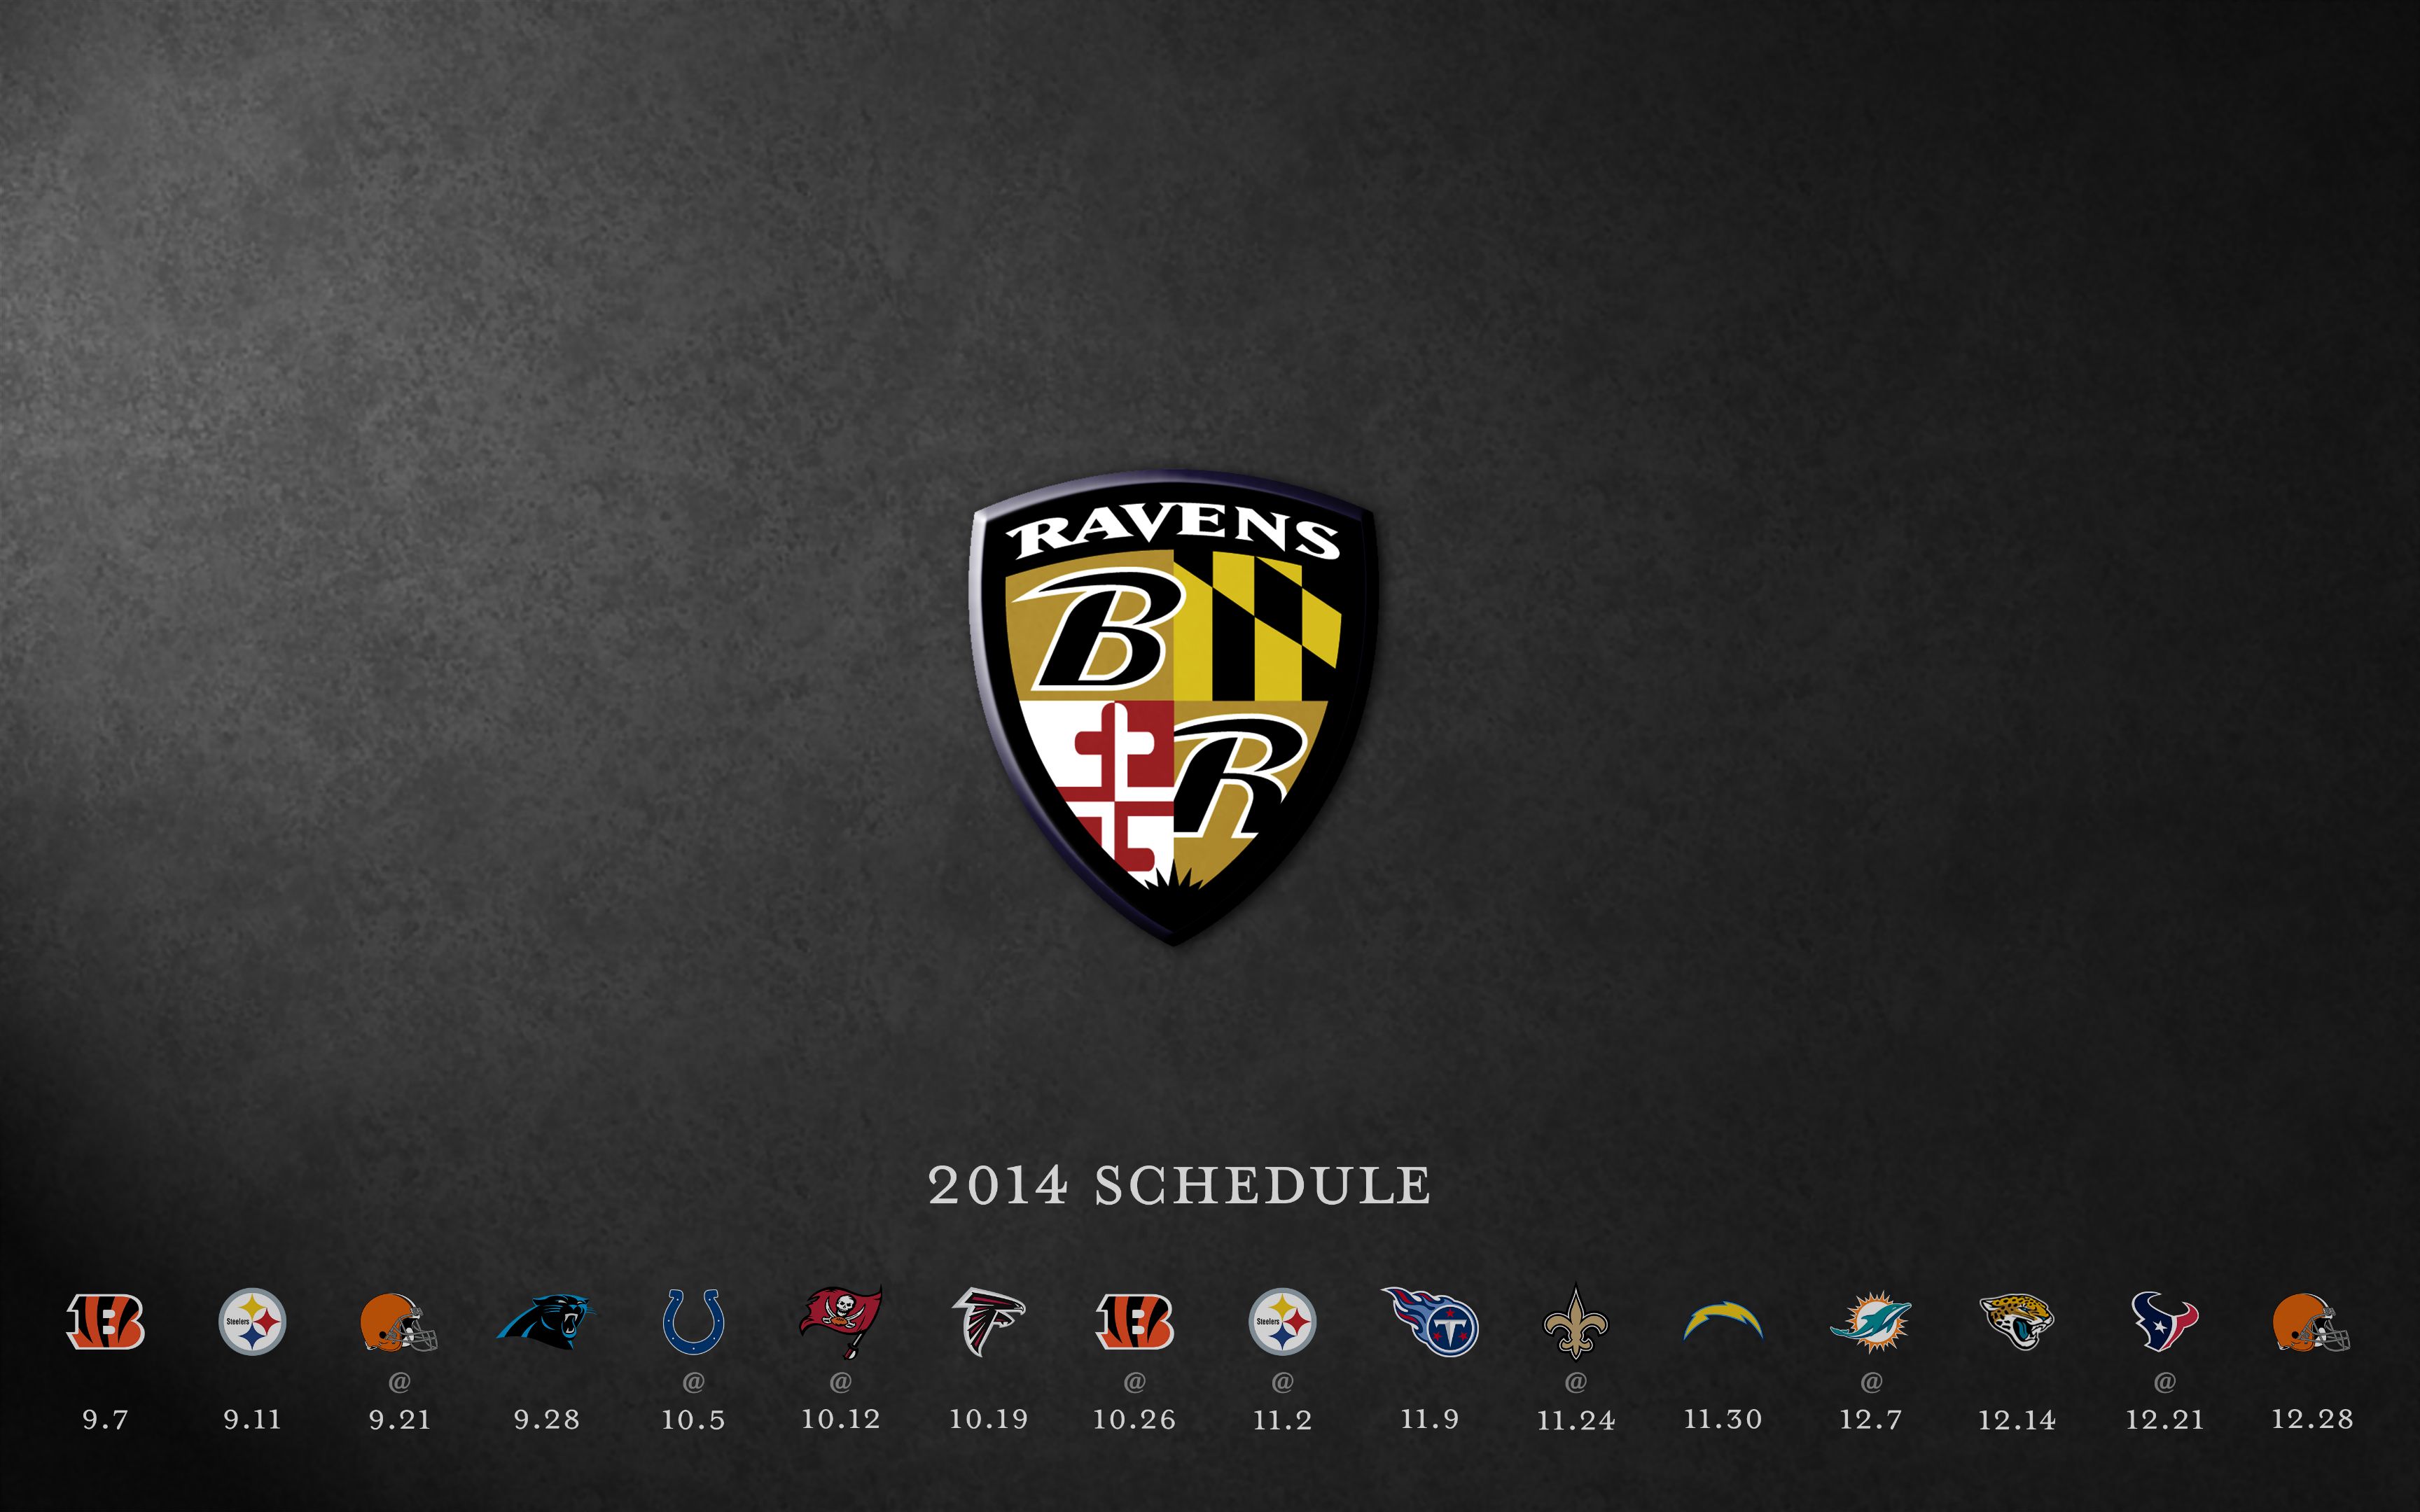 anyone have a desktop wallpaper with the 2015 schedule? : ravens